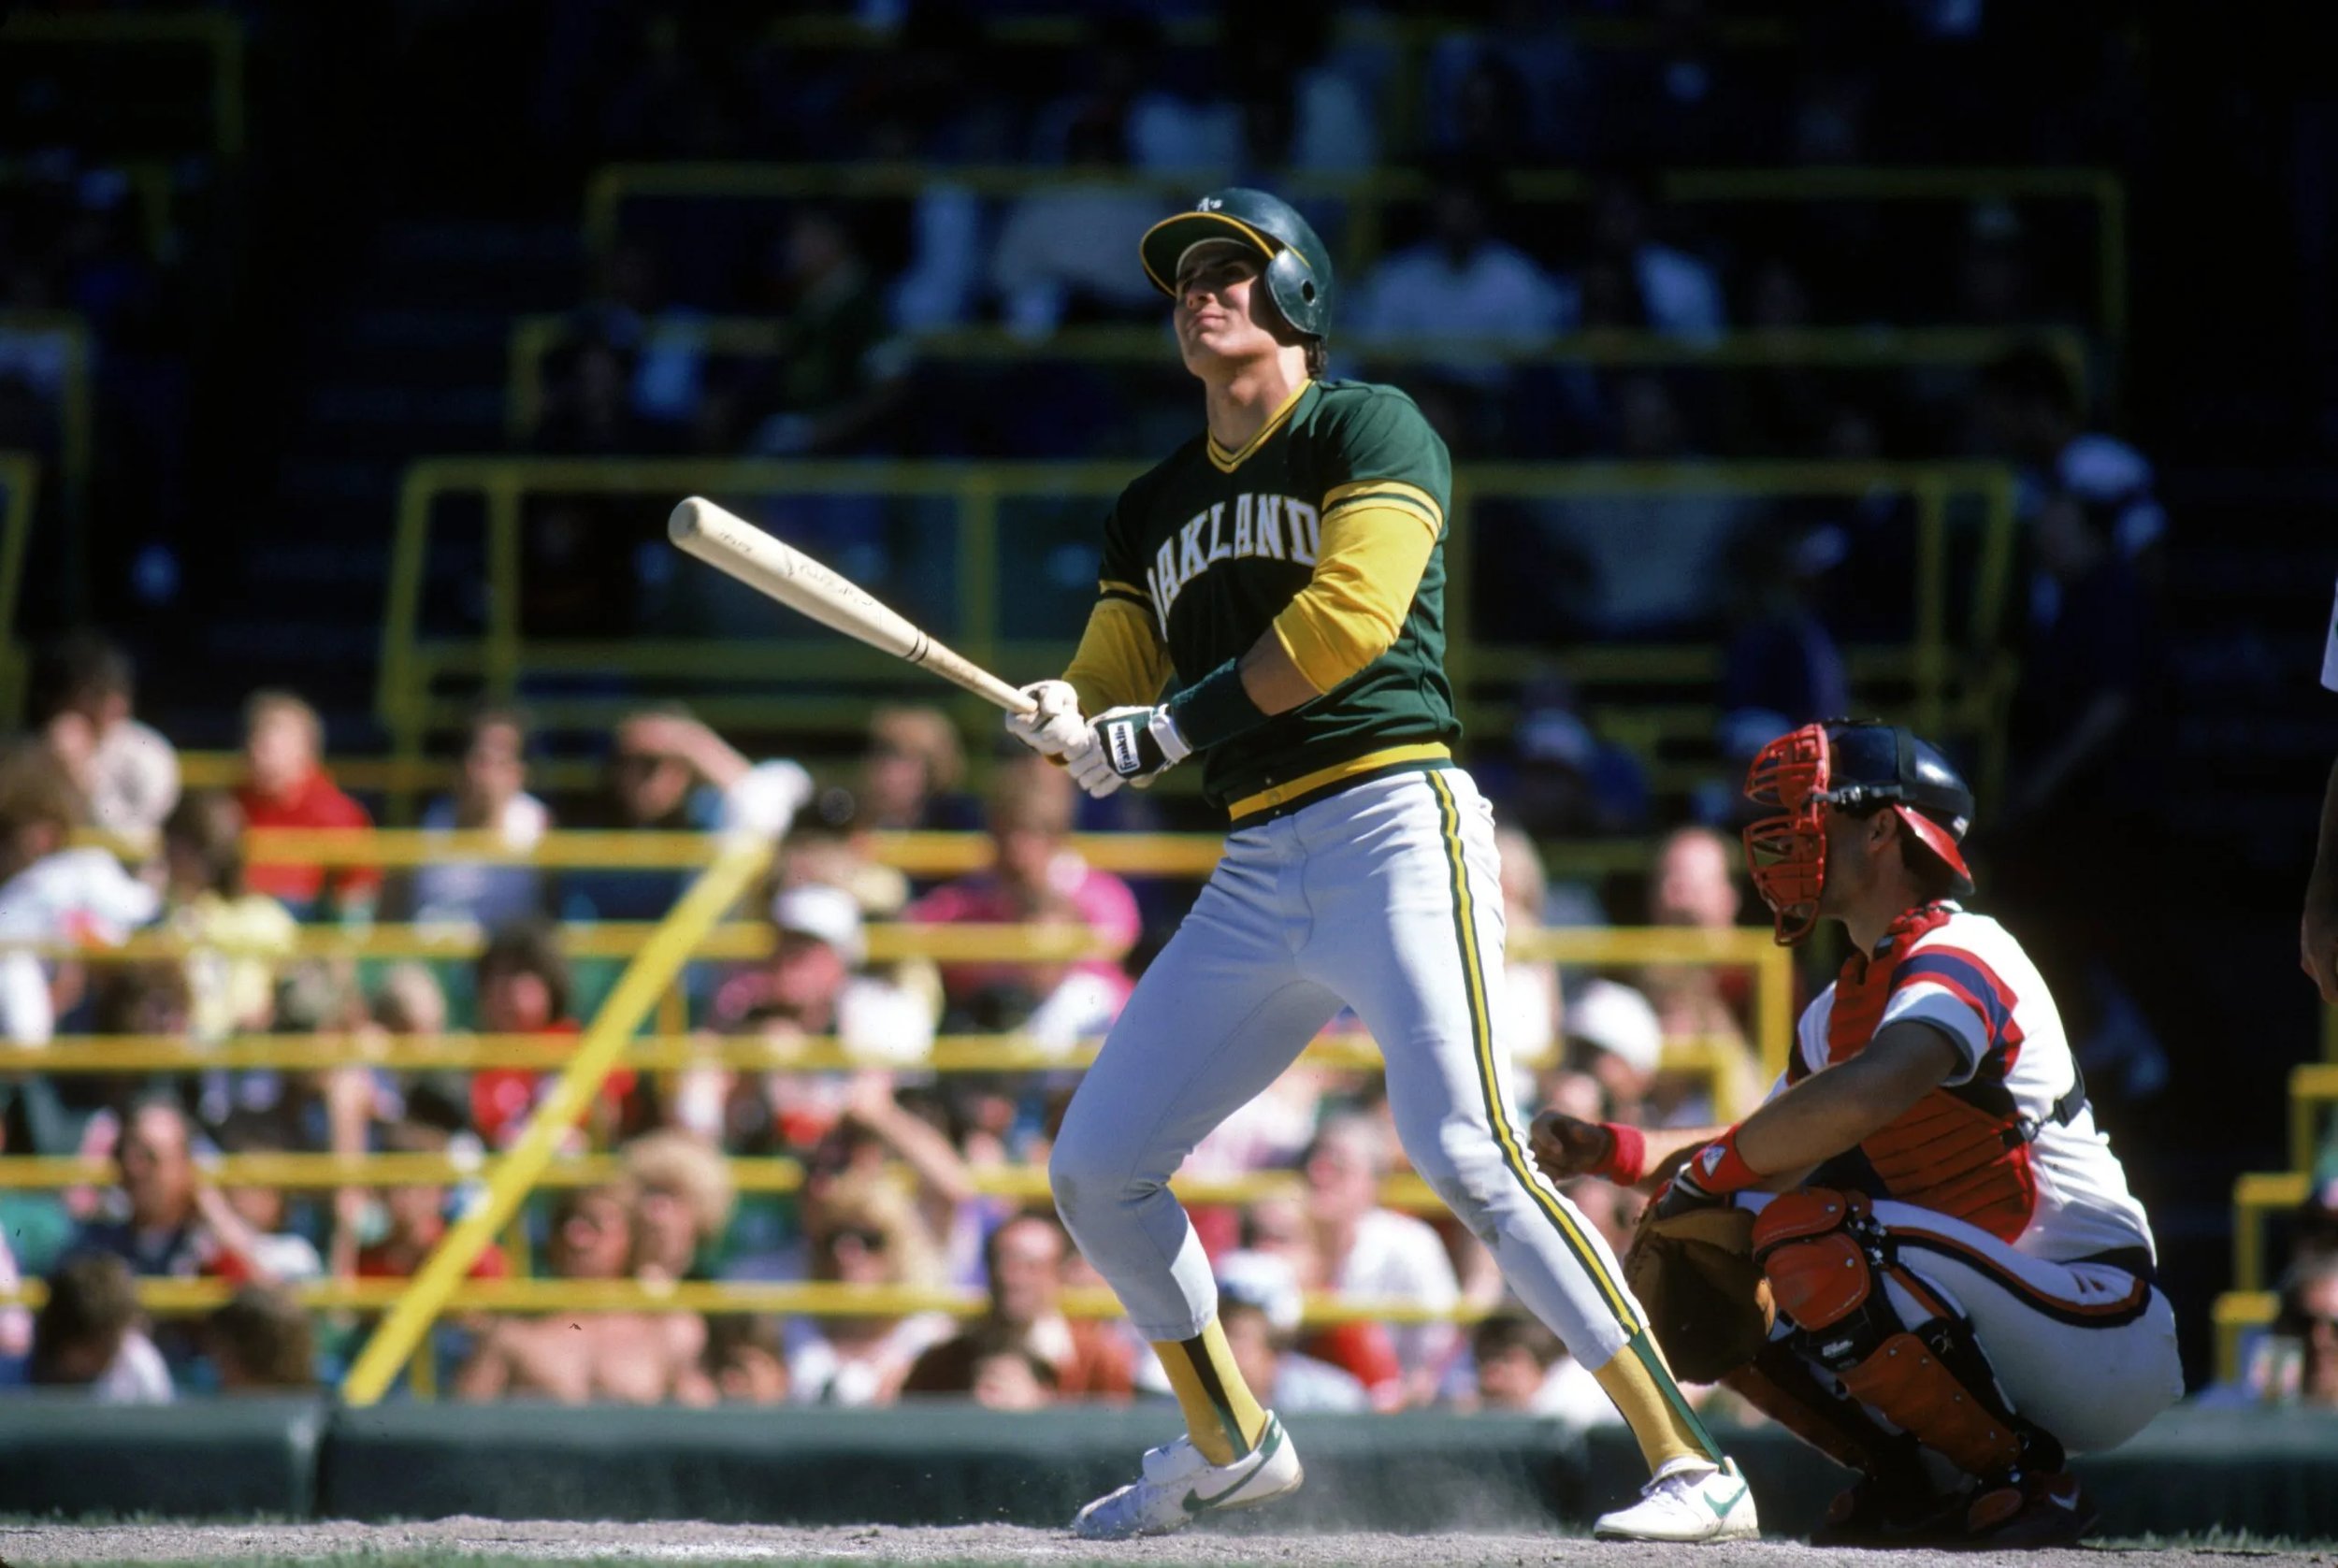 jose canseco16.jpg